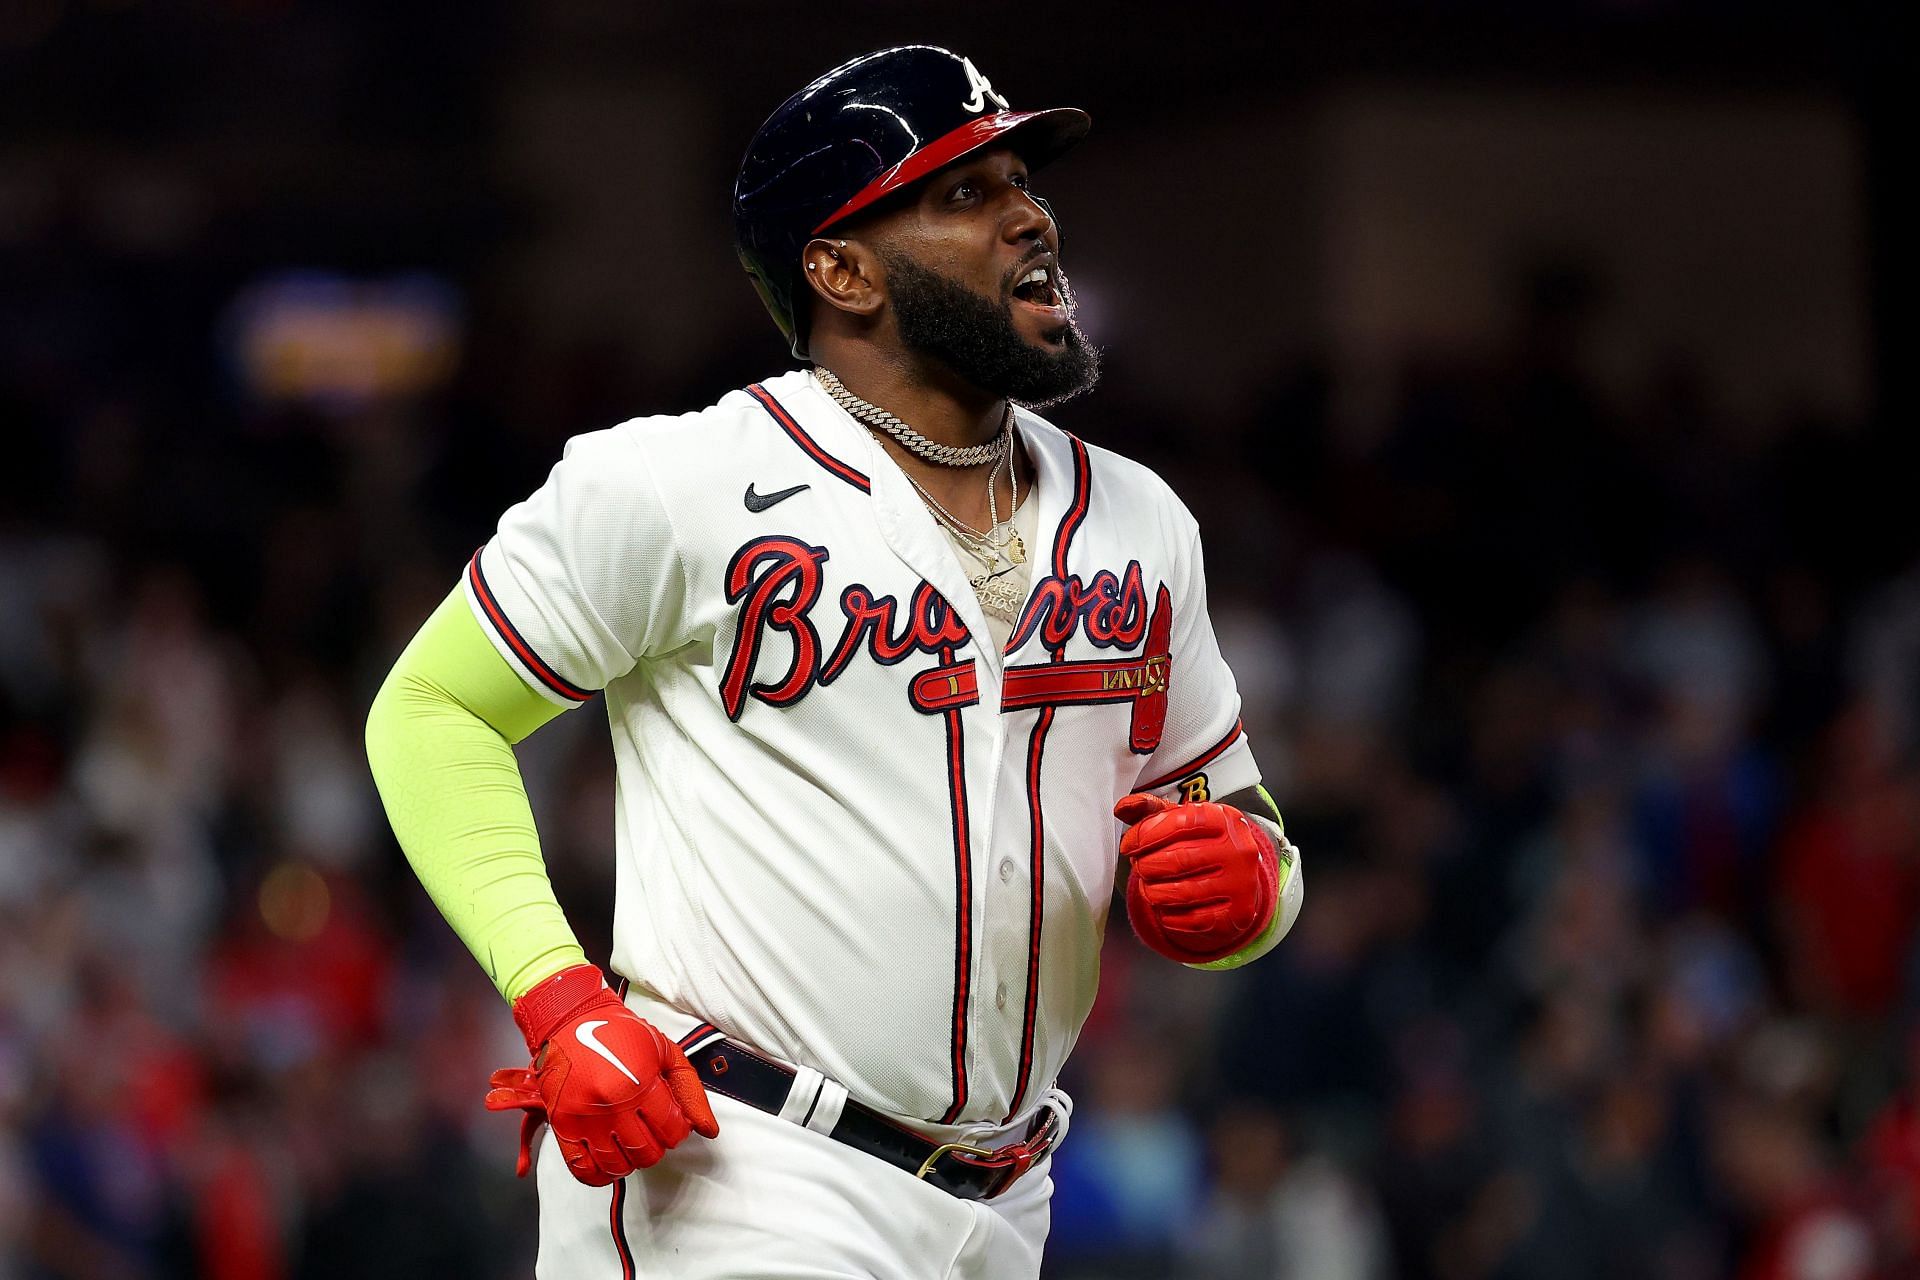 Marcell Ozuna of the Atlanta Braves reacts after getting out.